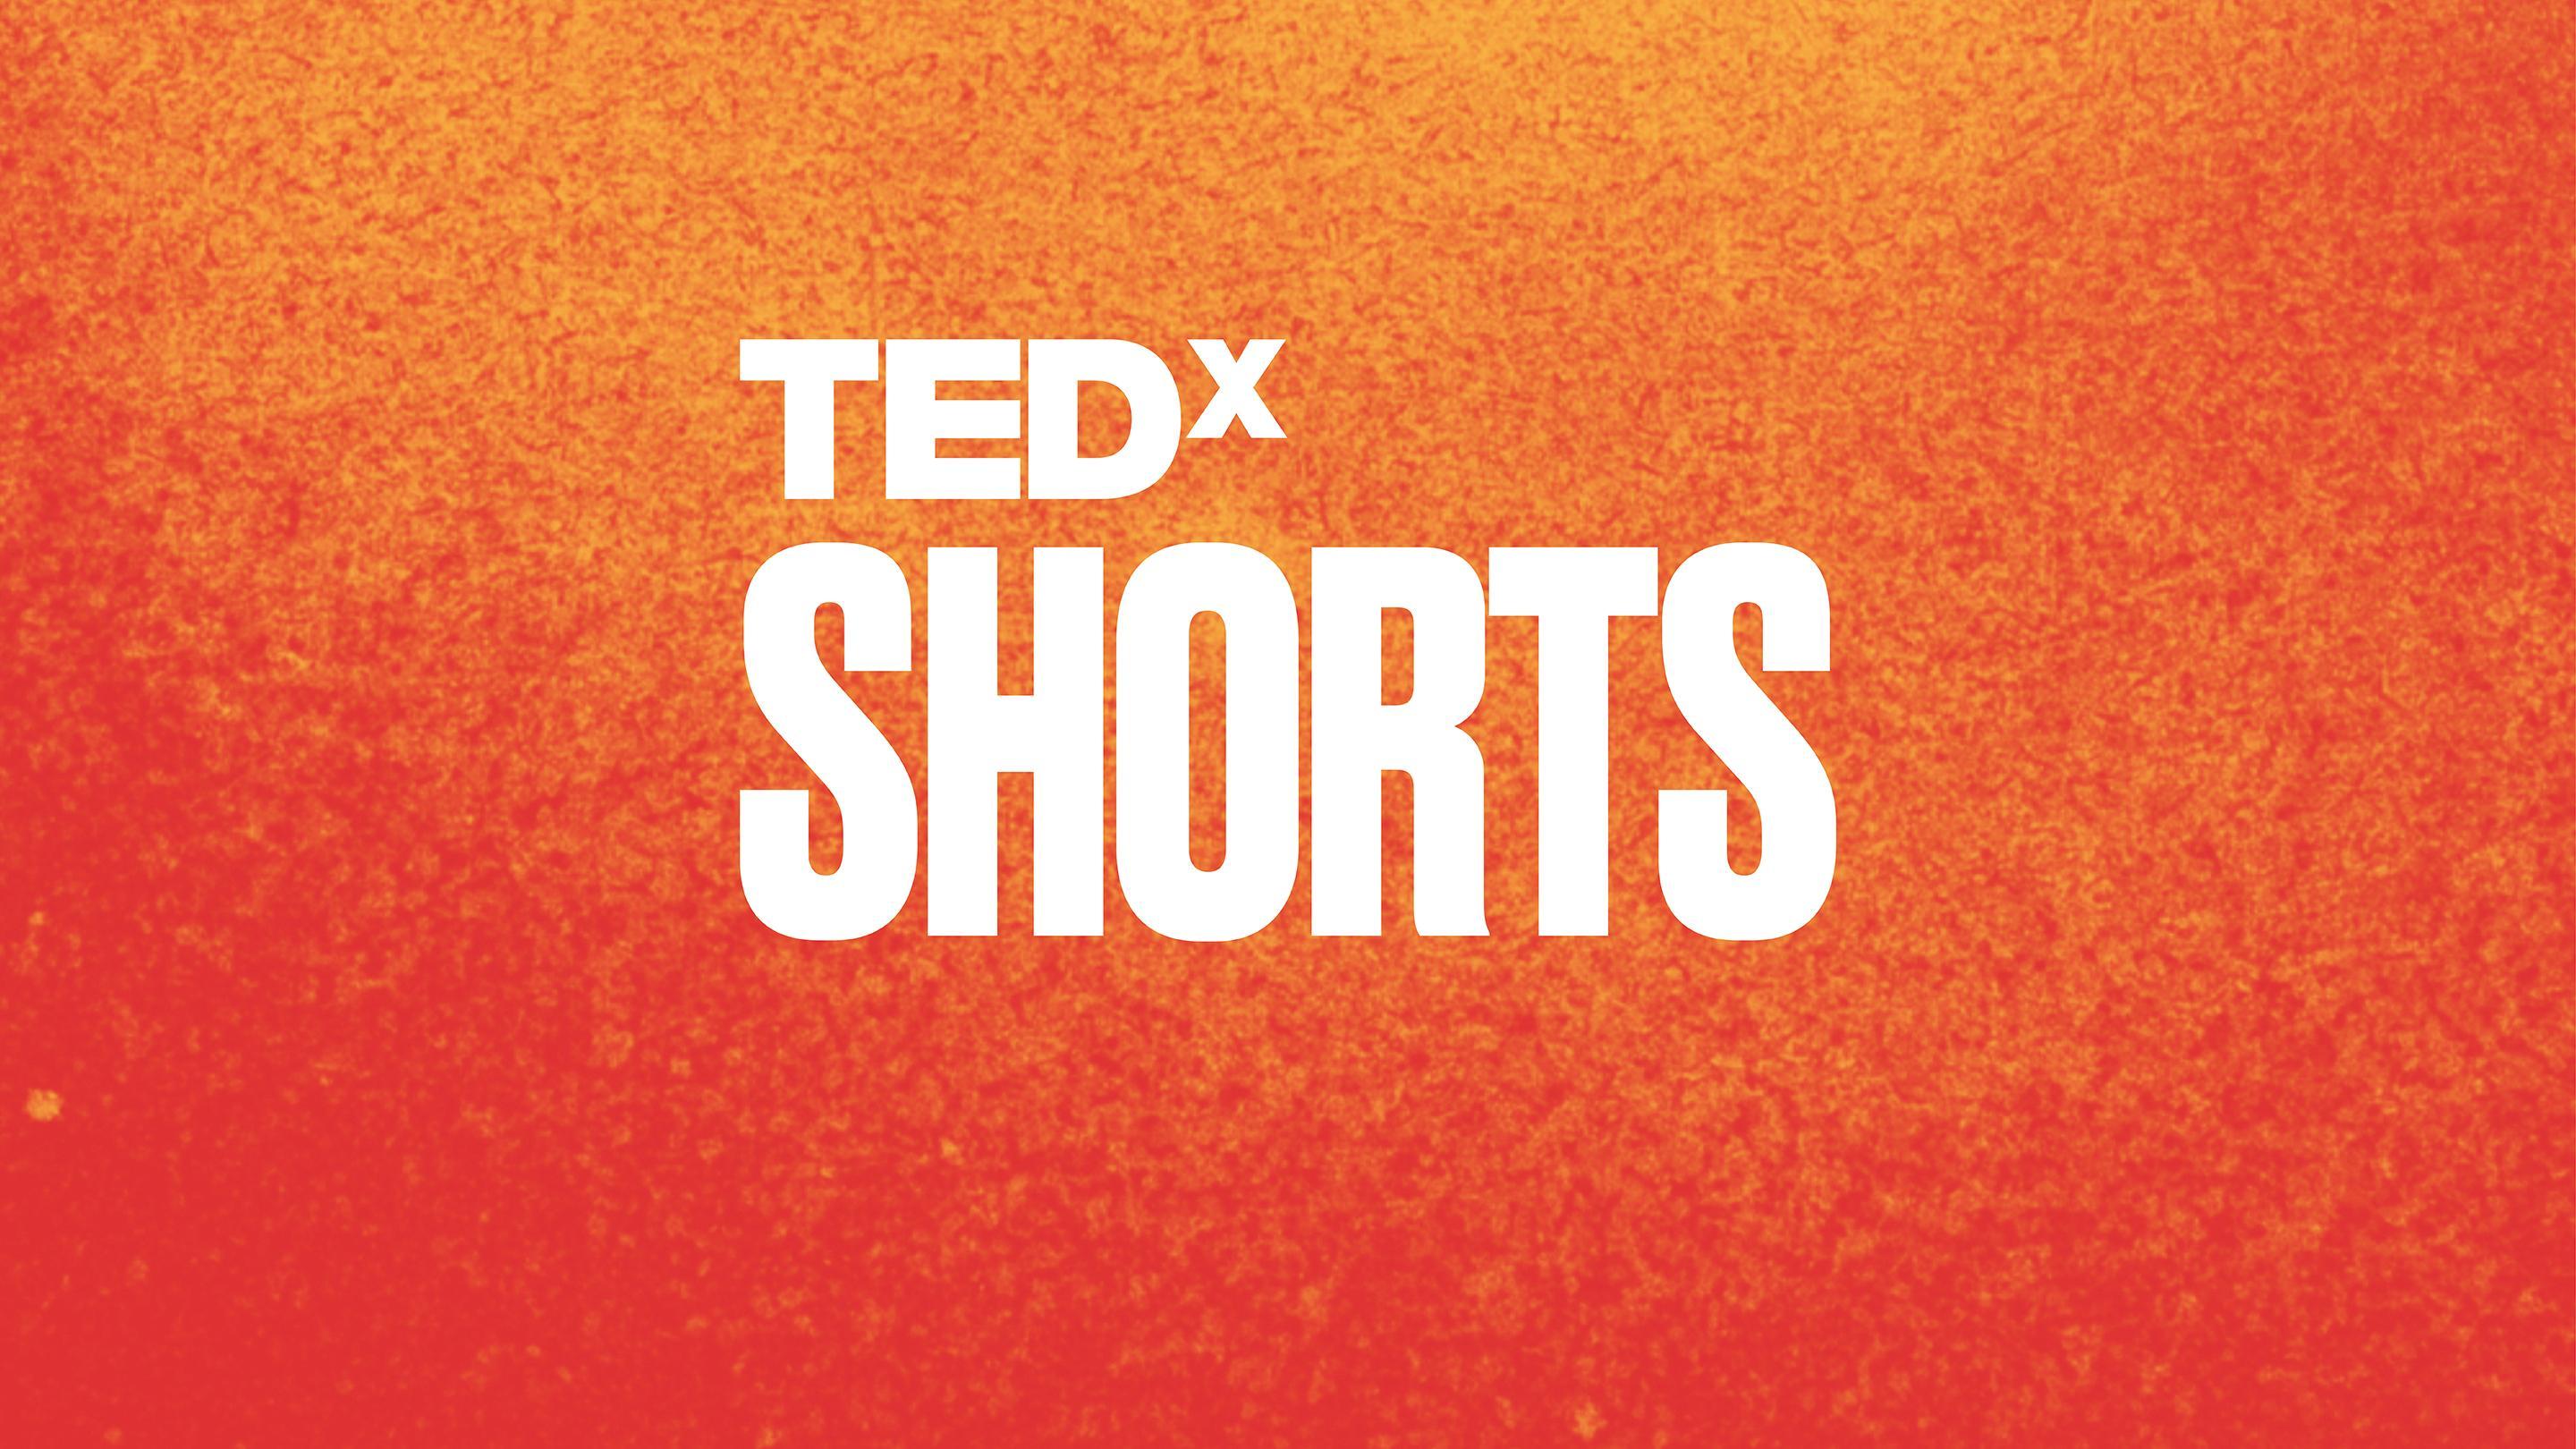 How to design the life you want  | TEDx SHORTS